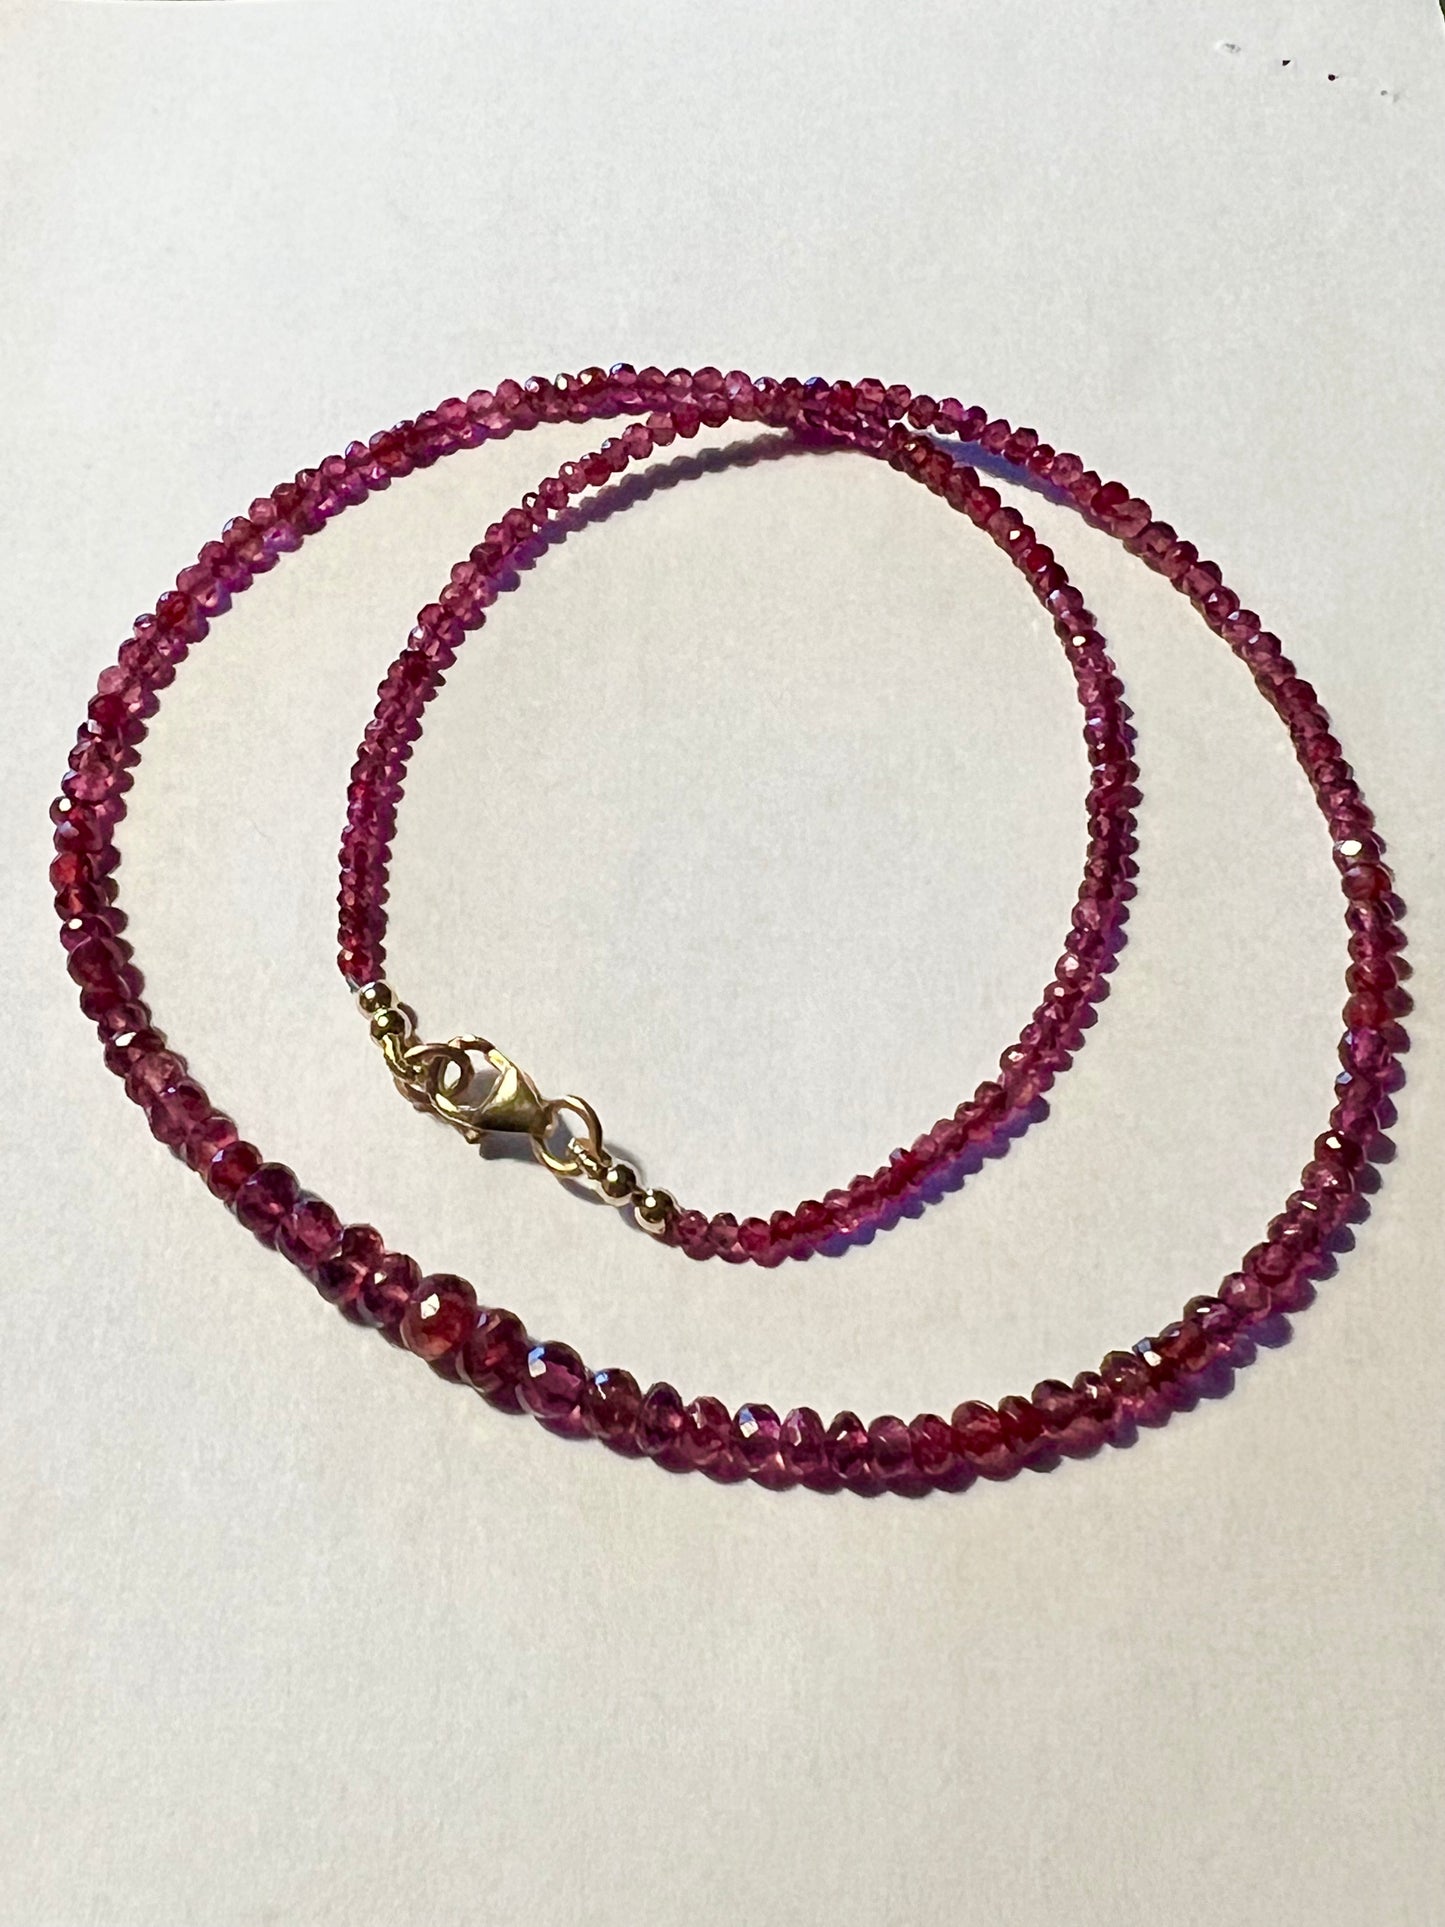 Red Spinel Faceted Choker  - One of a Kind Minimalist Necklace